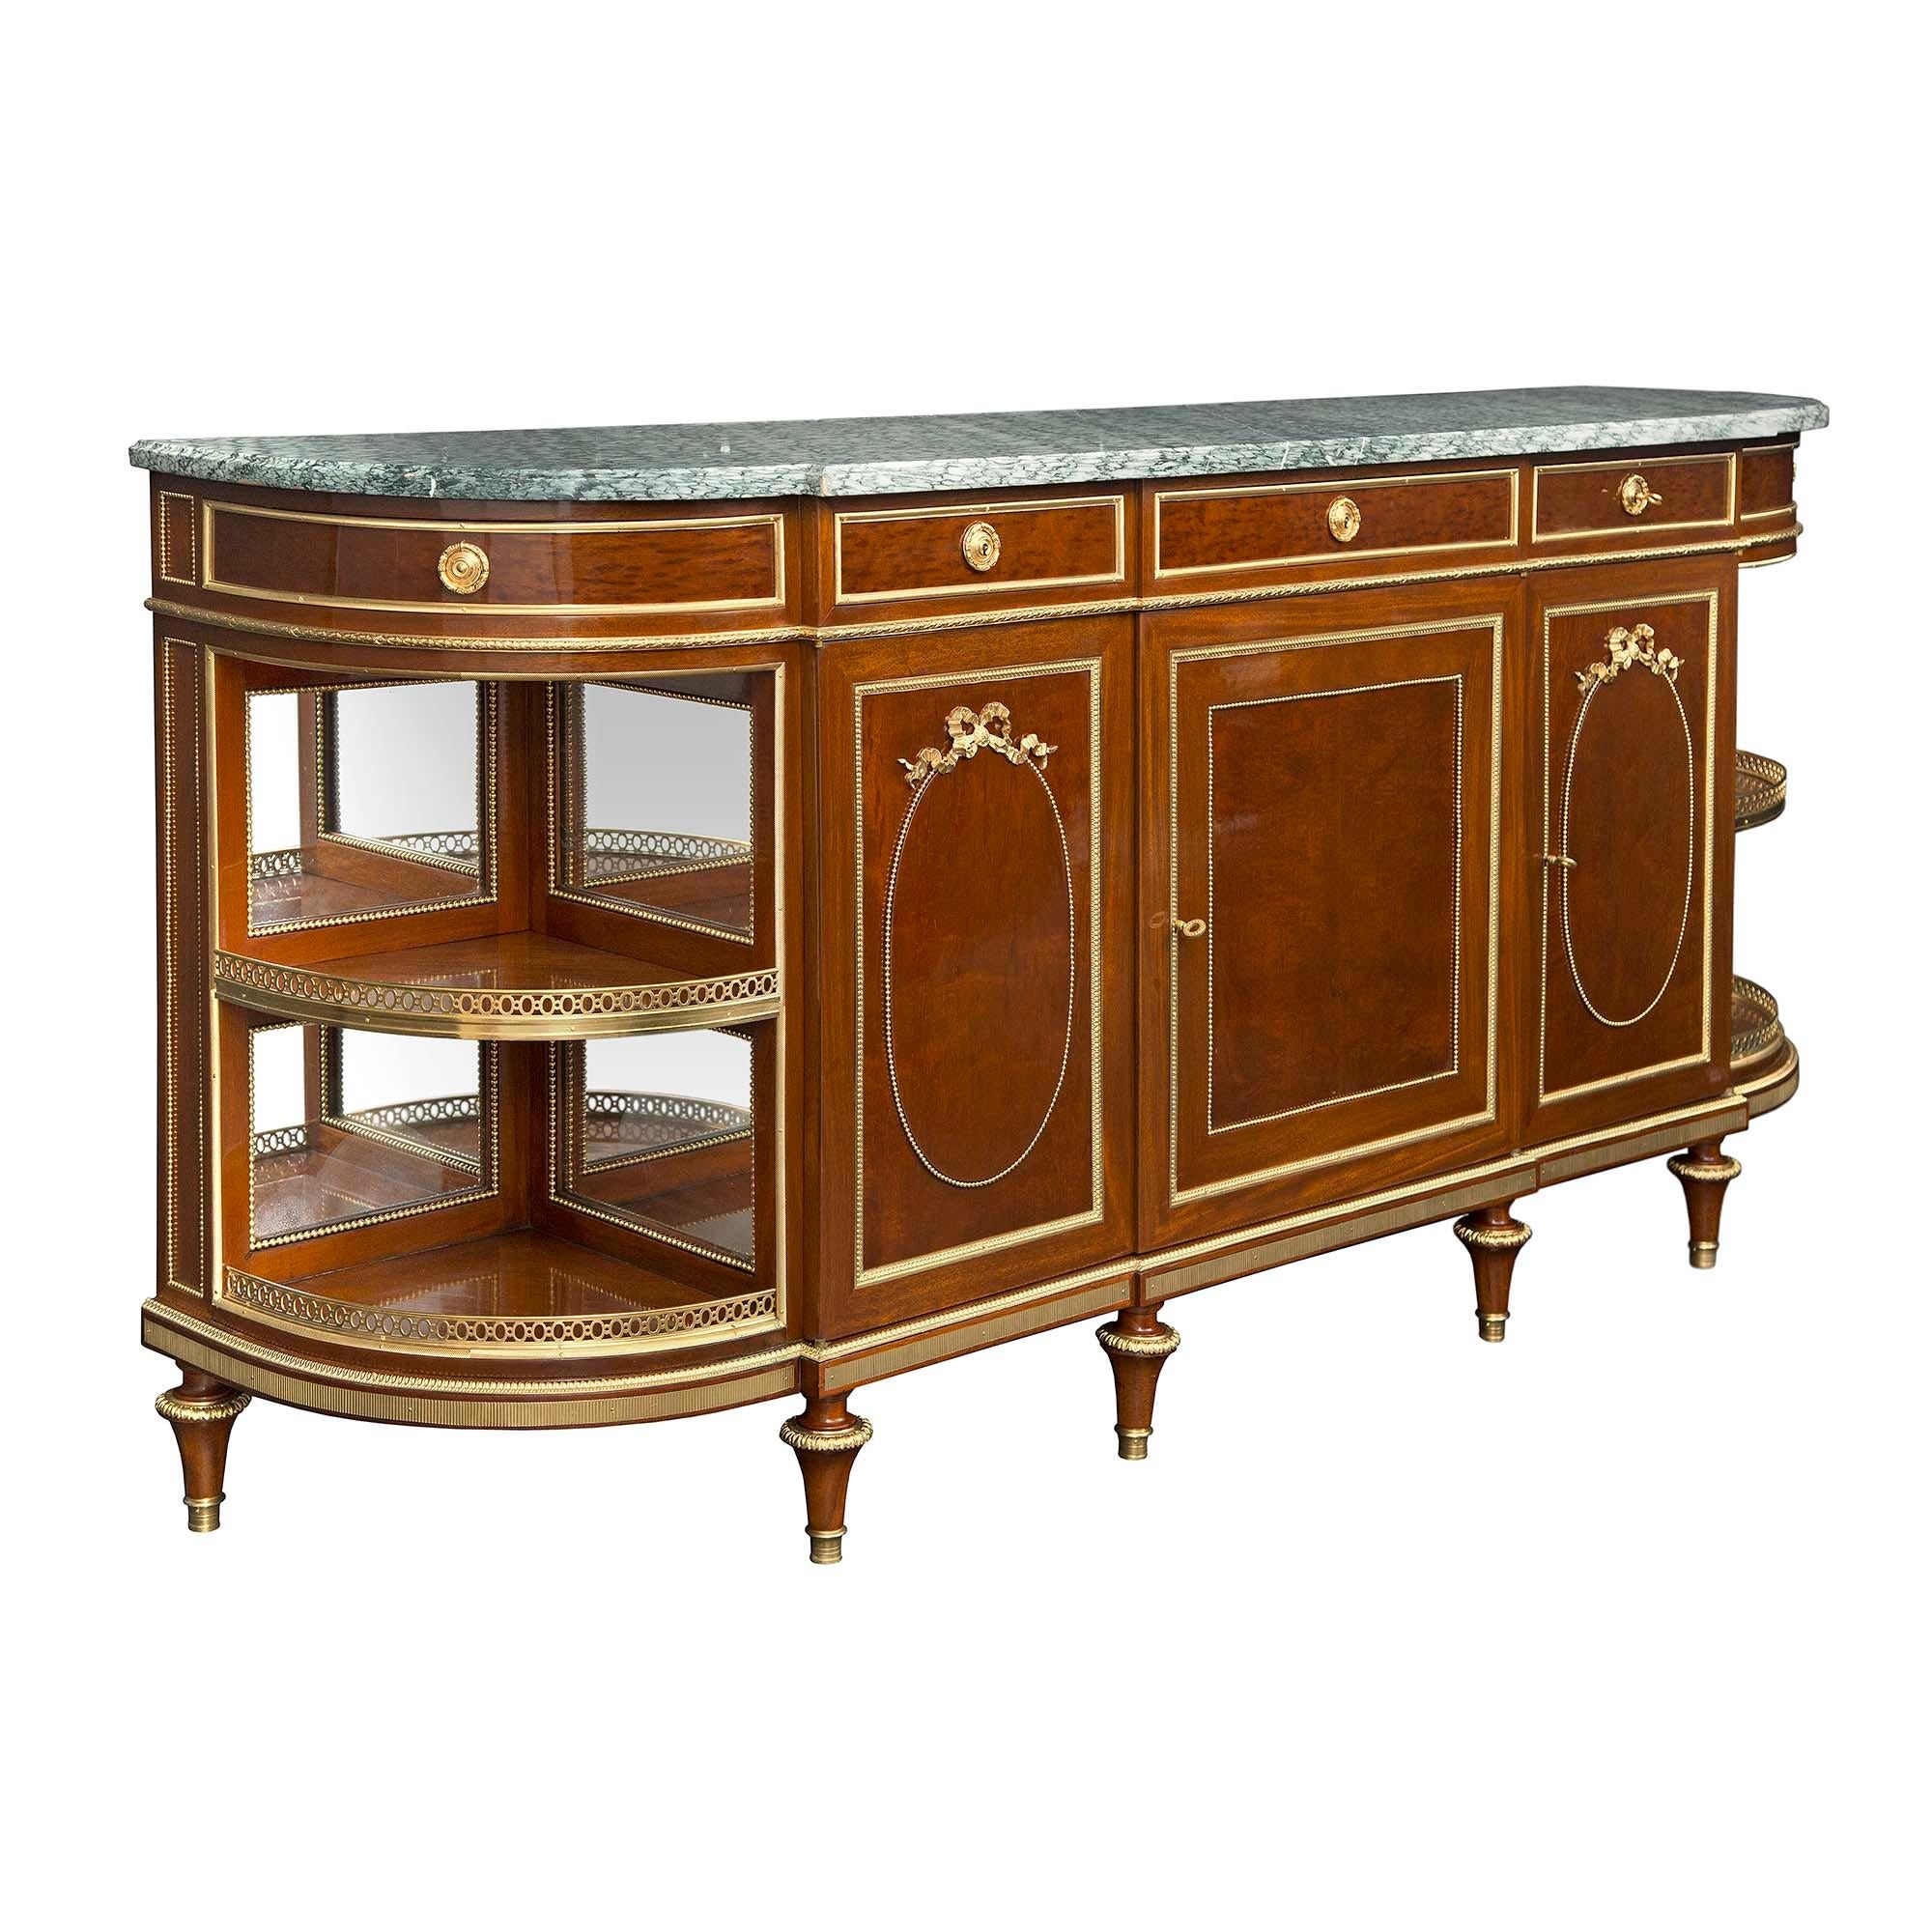 A high quality and most elegant French 19th century Louis XVI st. mahogany and ormolu buffet. The three drawer and five drawer buffet is raised by circular tapered legs with ormolu feet and fine ormolu top caps below a fluted ormolu frieze. Each